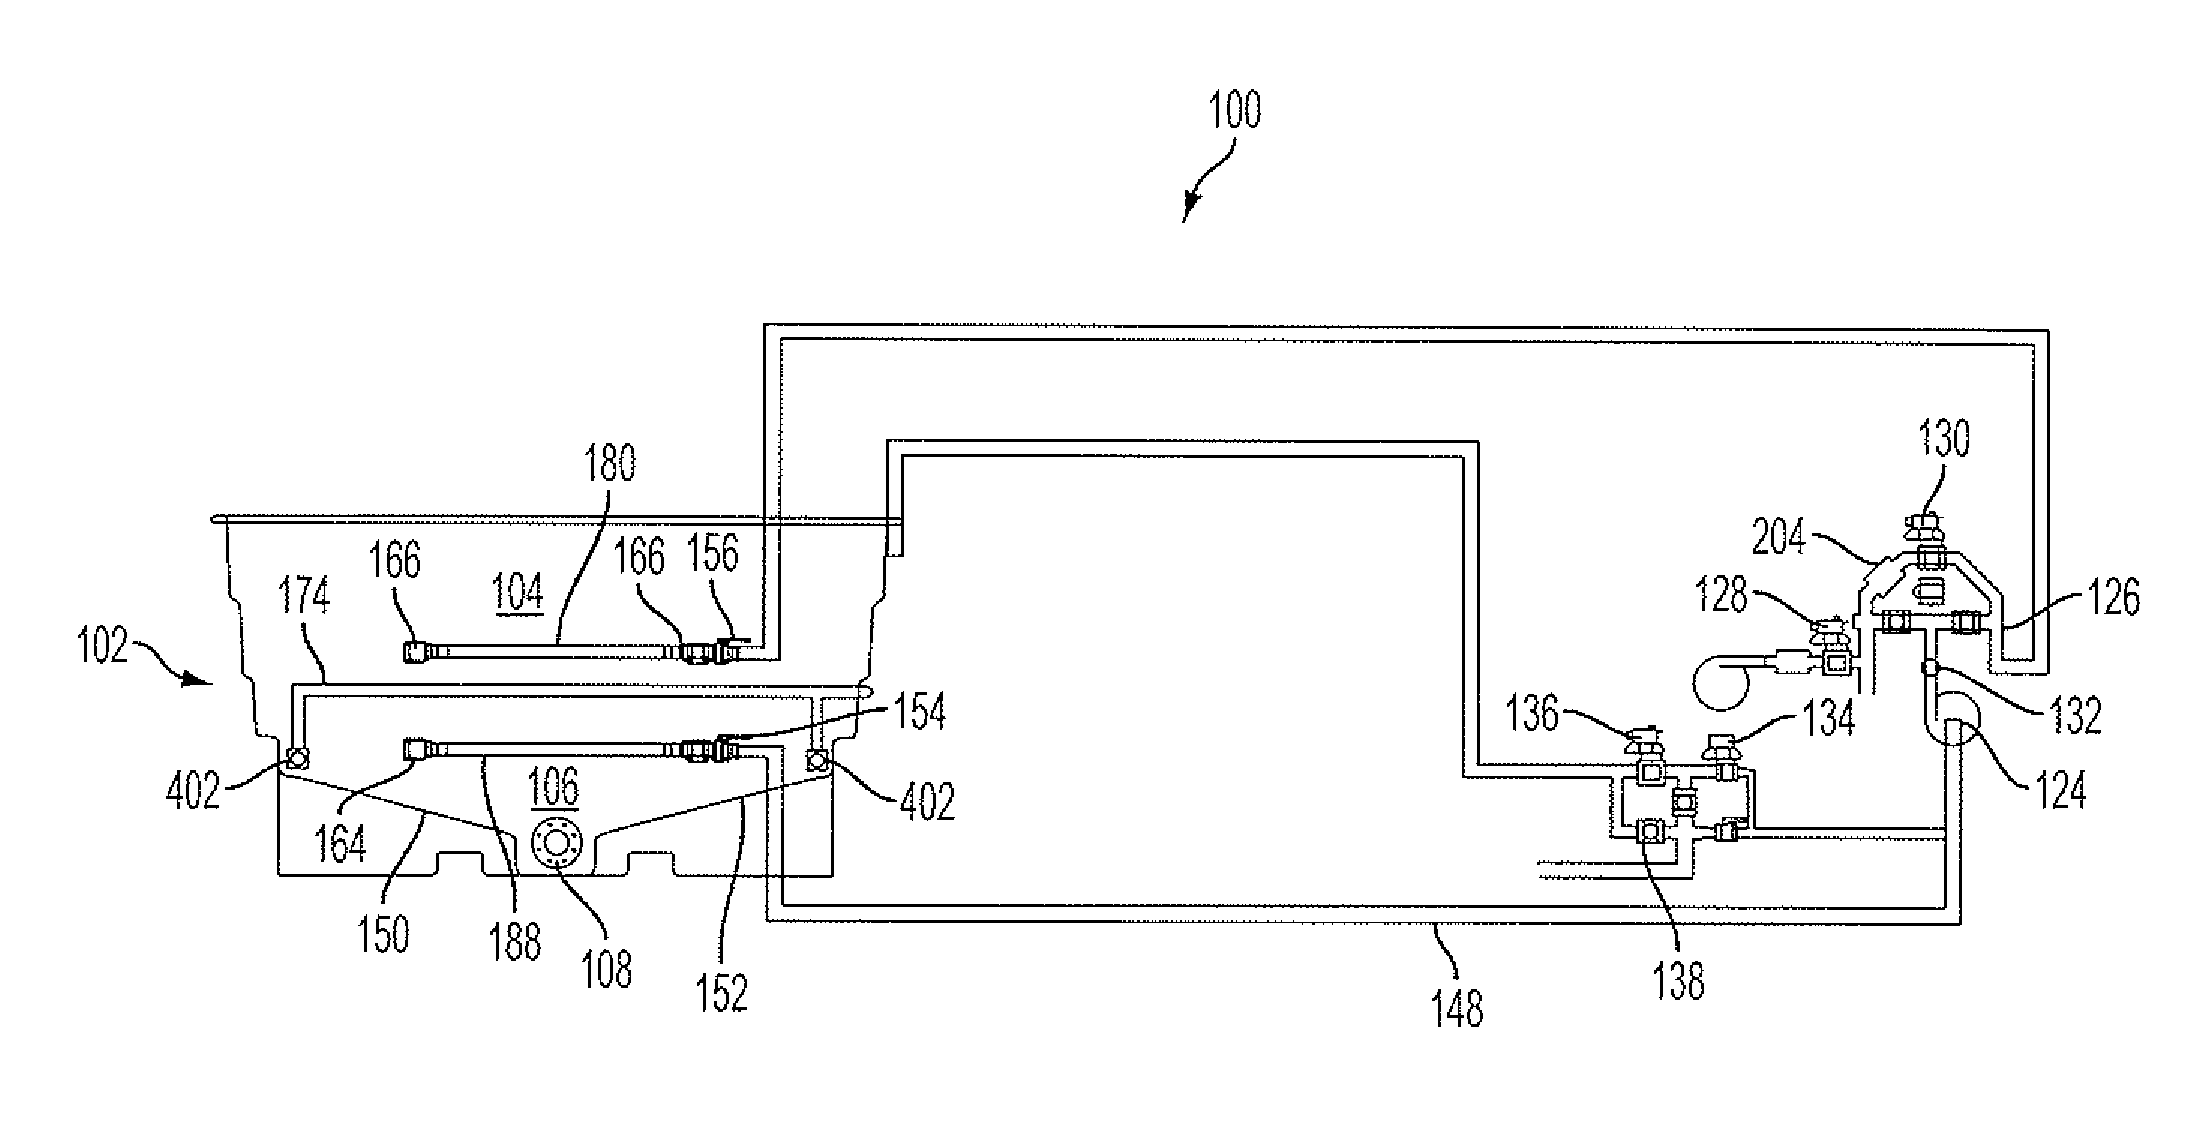 Solution making system and method